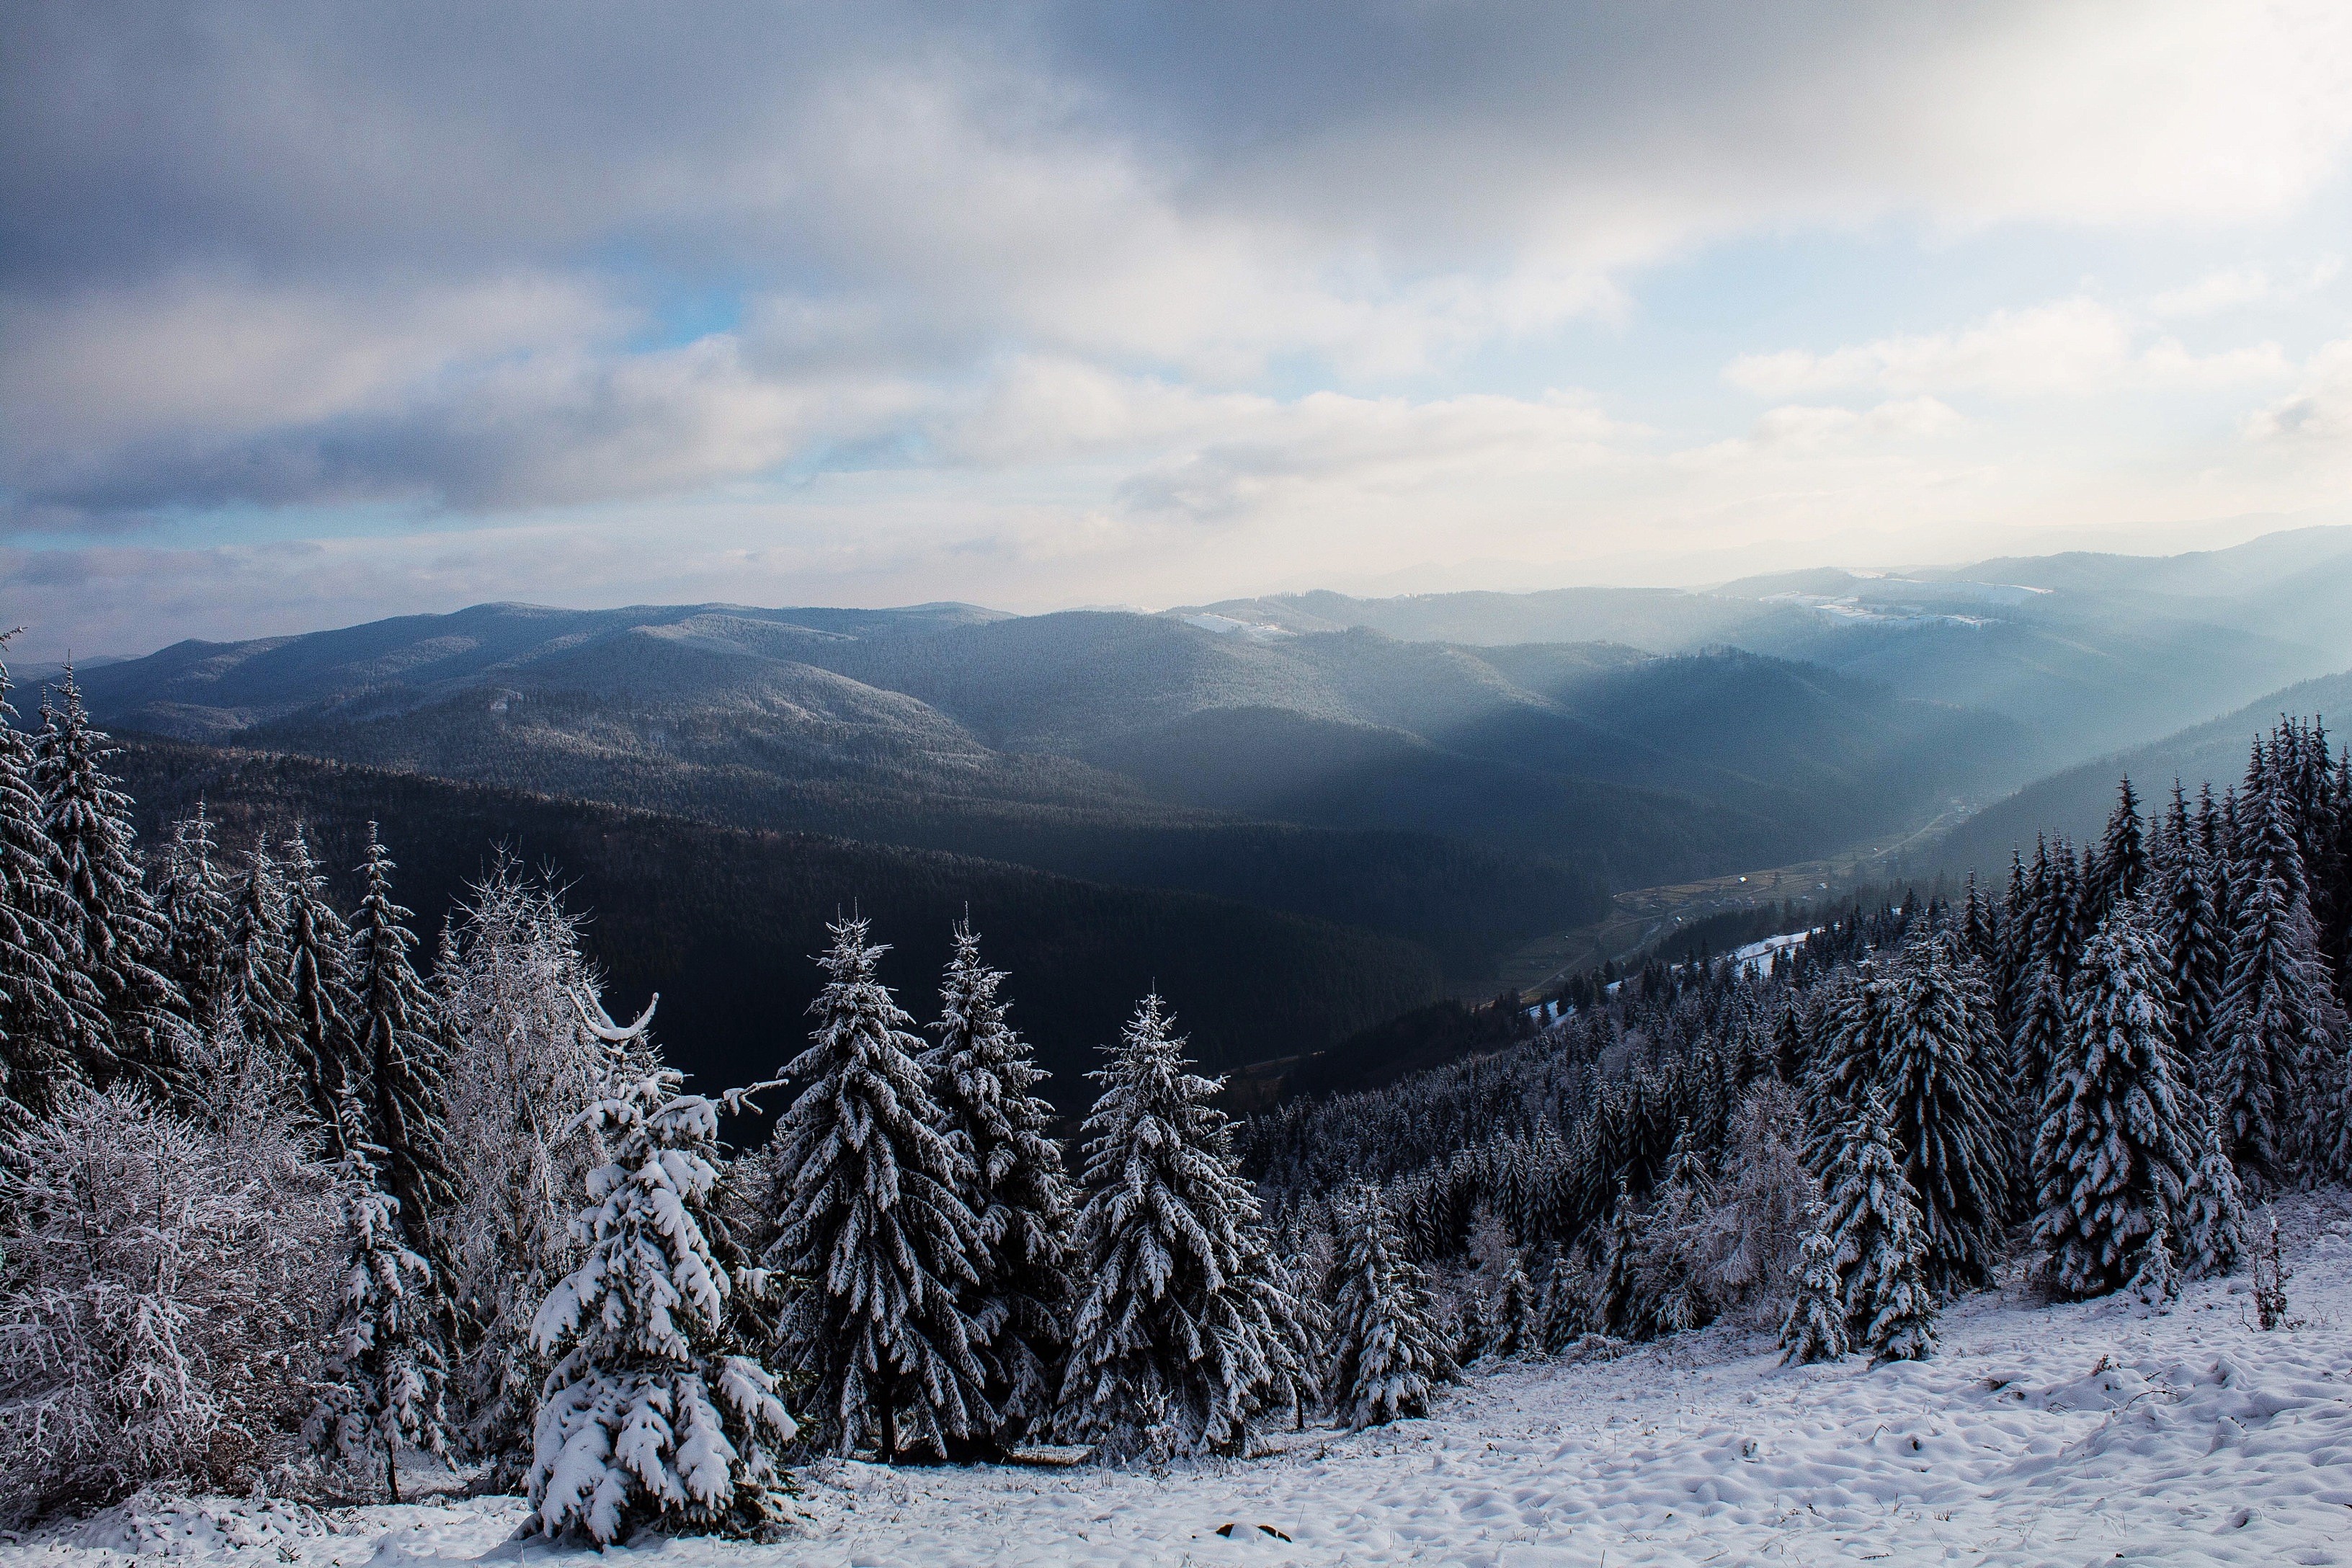 General 3264x2176 nature landscape sun rays winter snow trees pine trees forest clouds hills